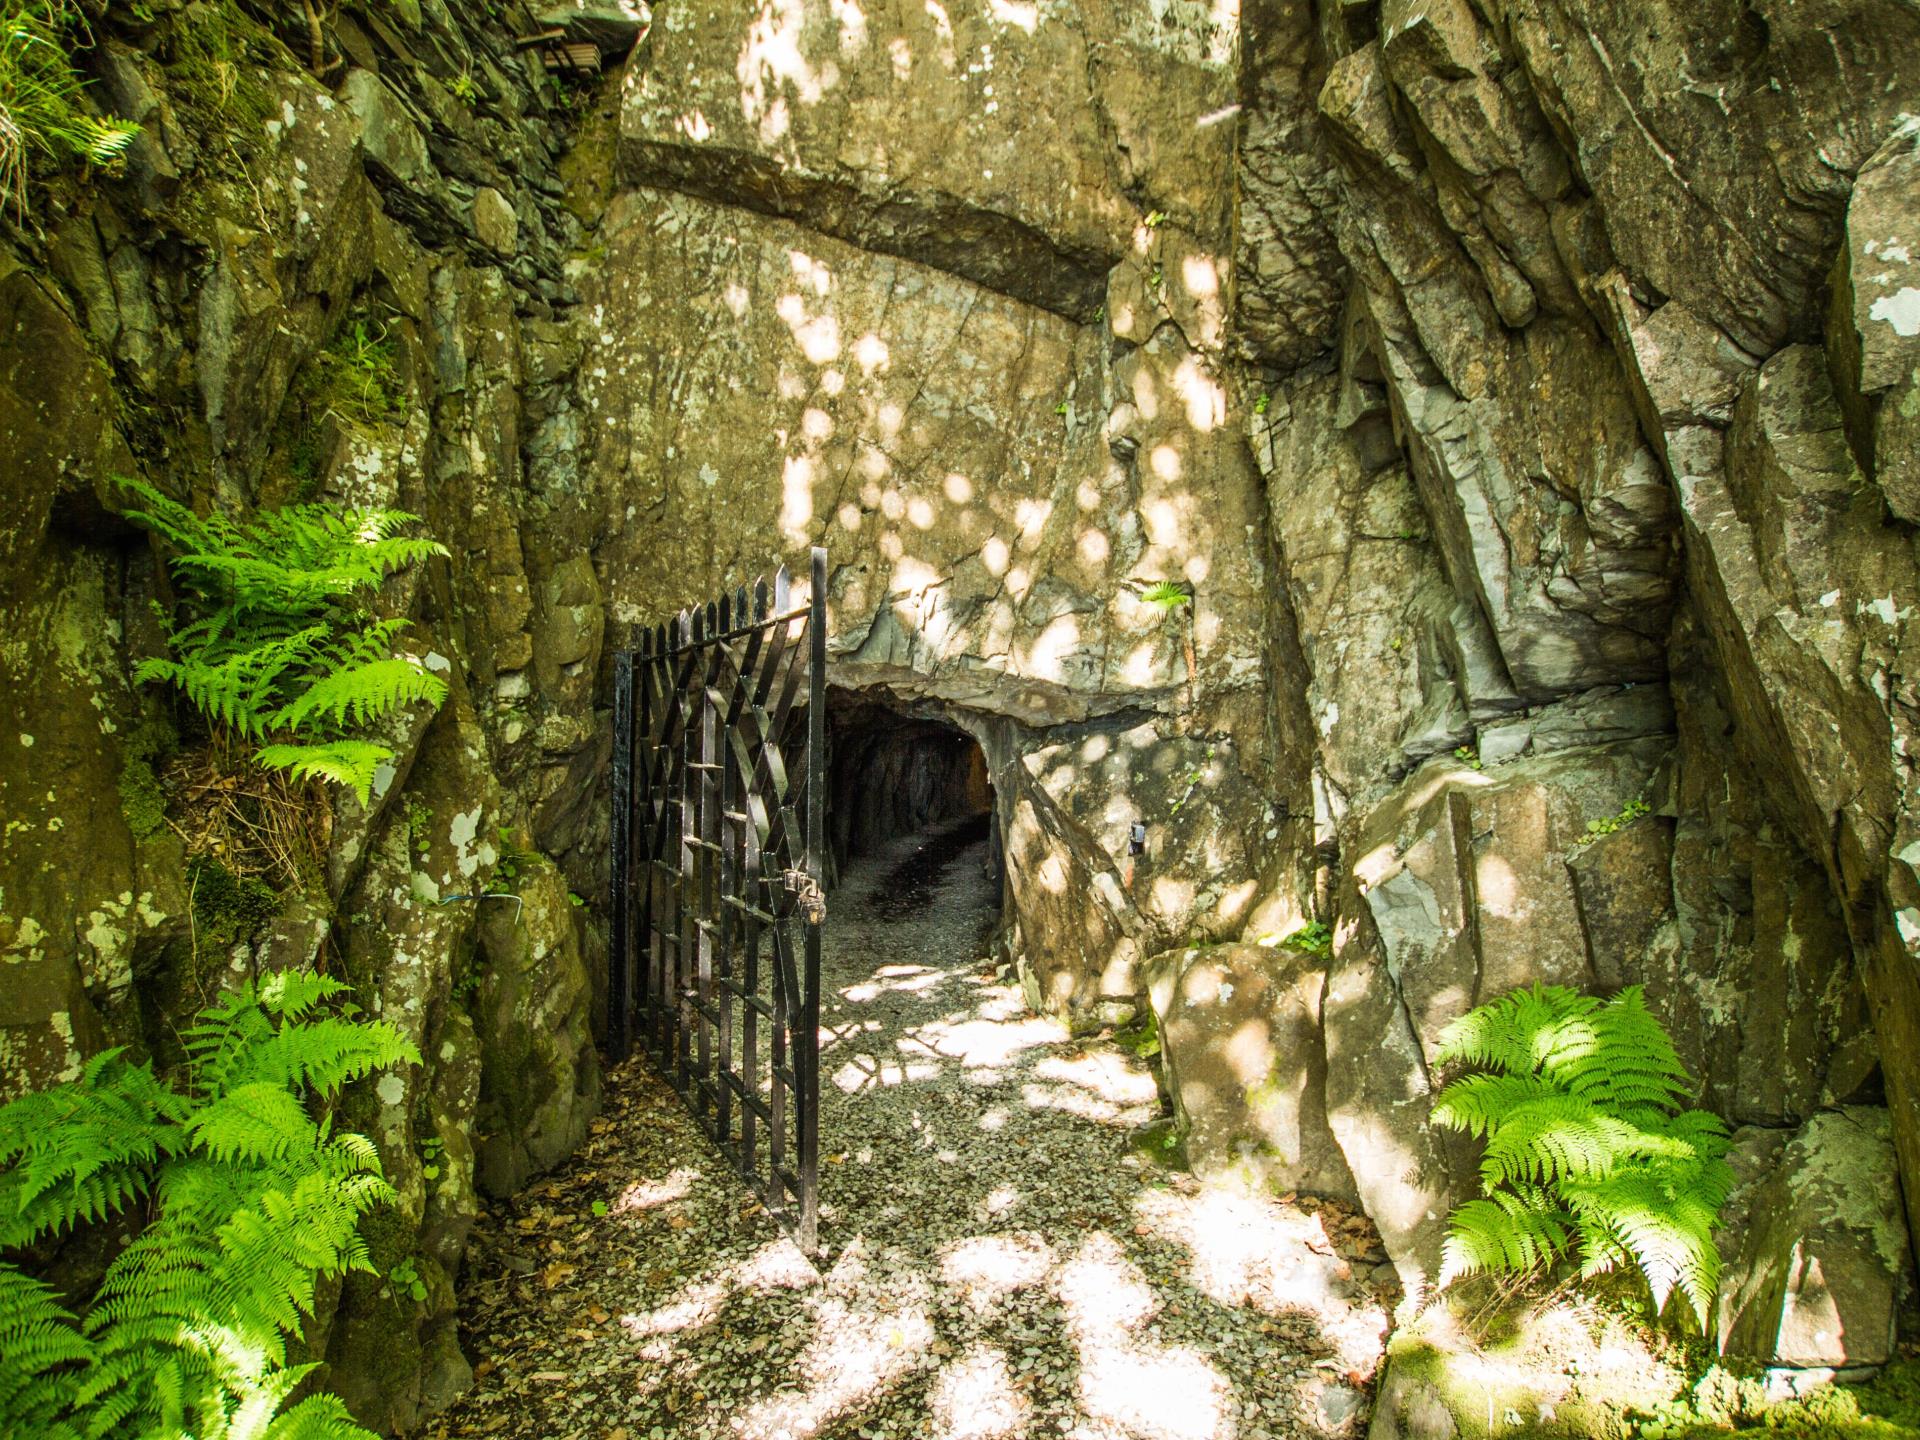 Entrance into the Slate caverns